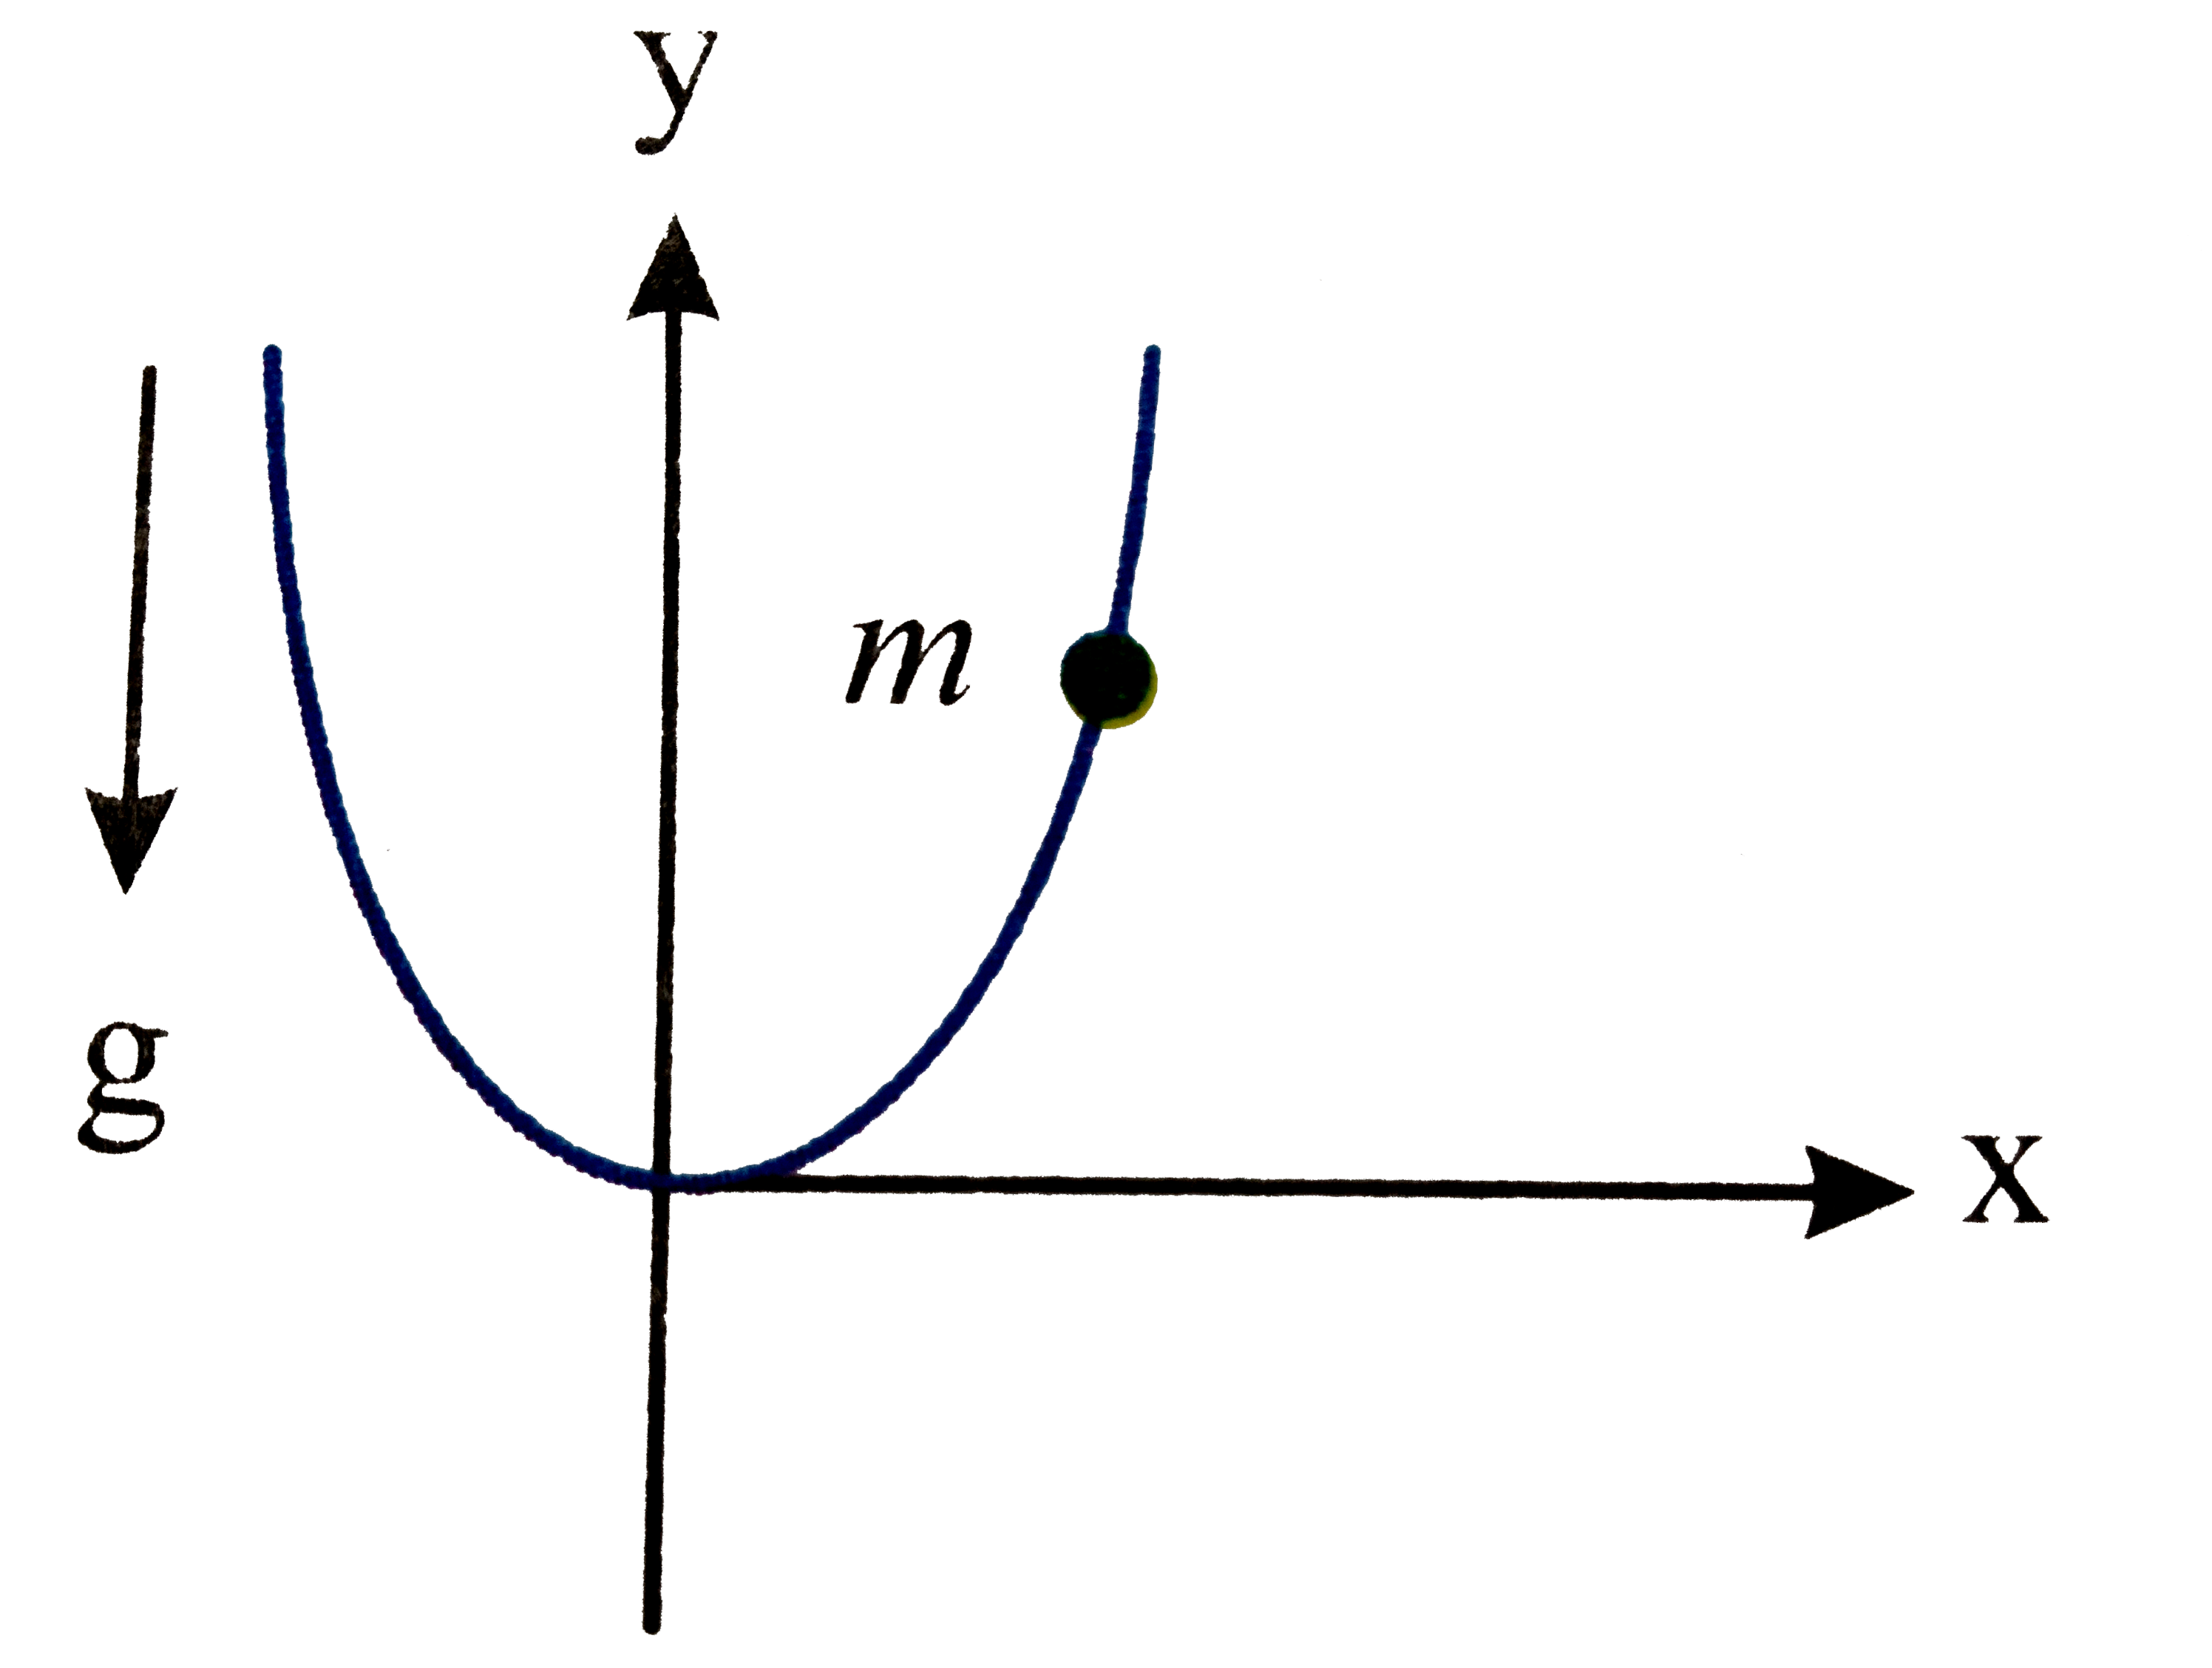 A particle of mass m is allowed to oscillate near the minimum of a vertical parabolic path having the equaiton x^(2) =4ay. The angular frequency of small oscillation is given by